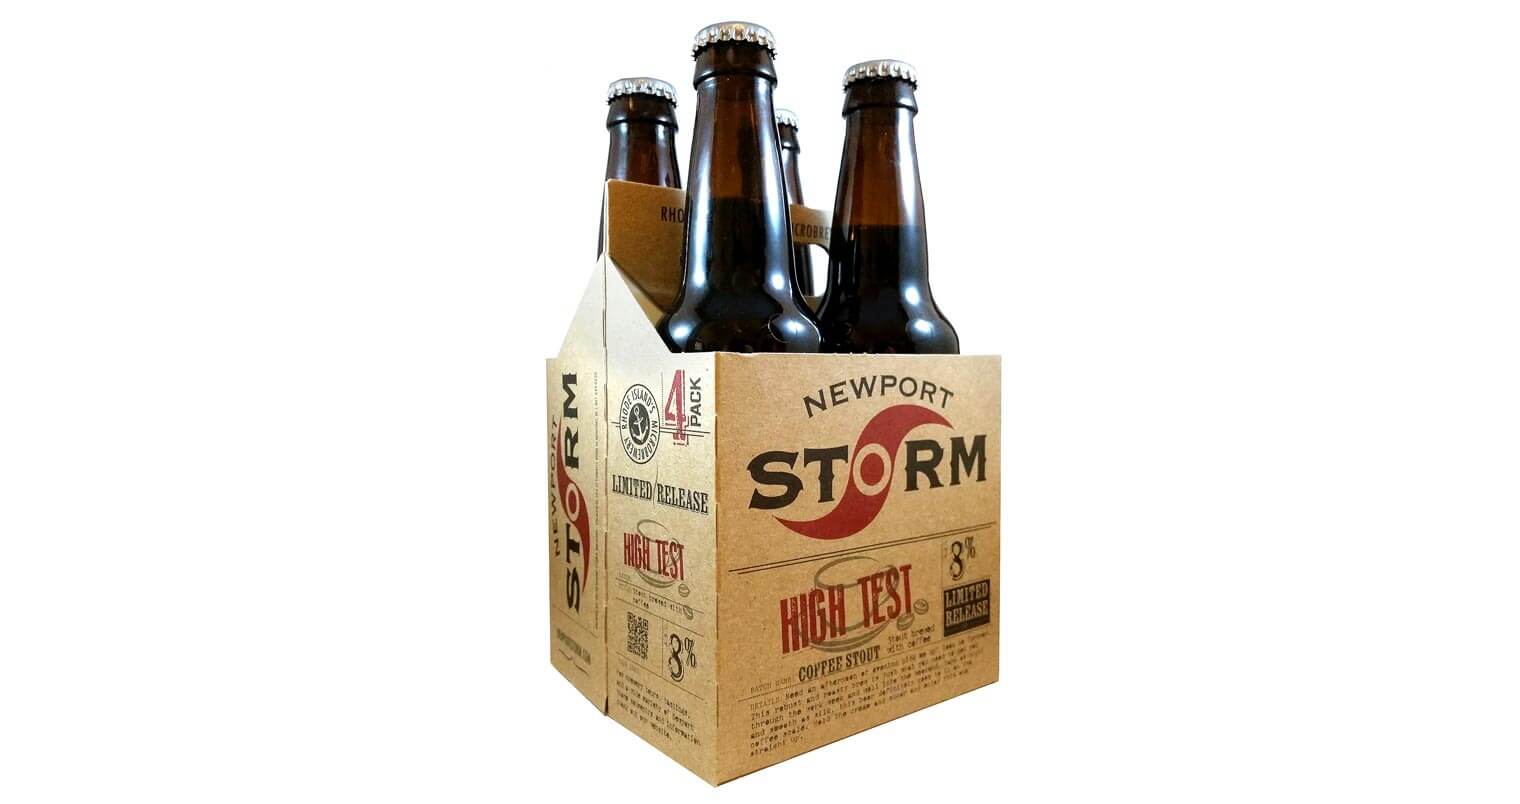 Newport Storm Launches High Test Coffee Stout, feature image